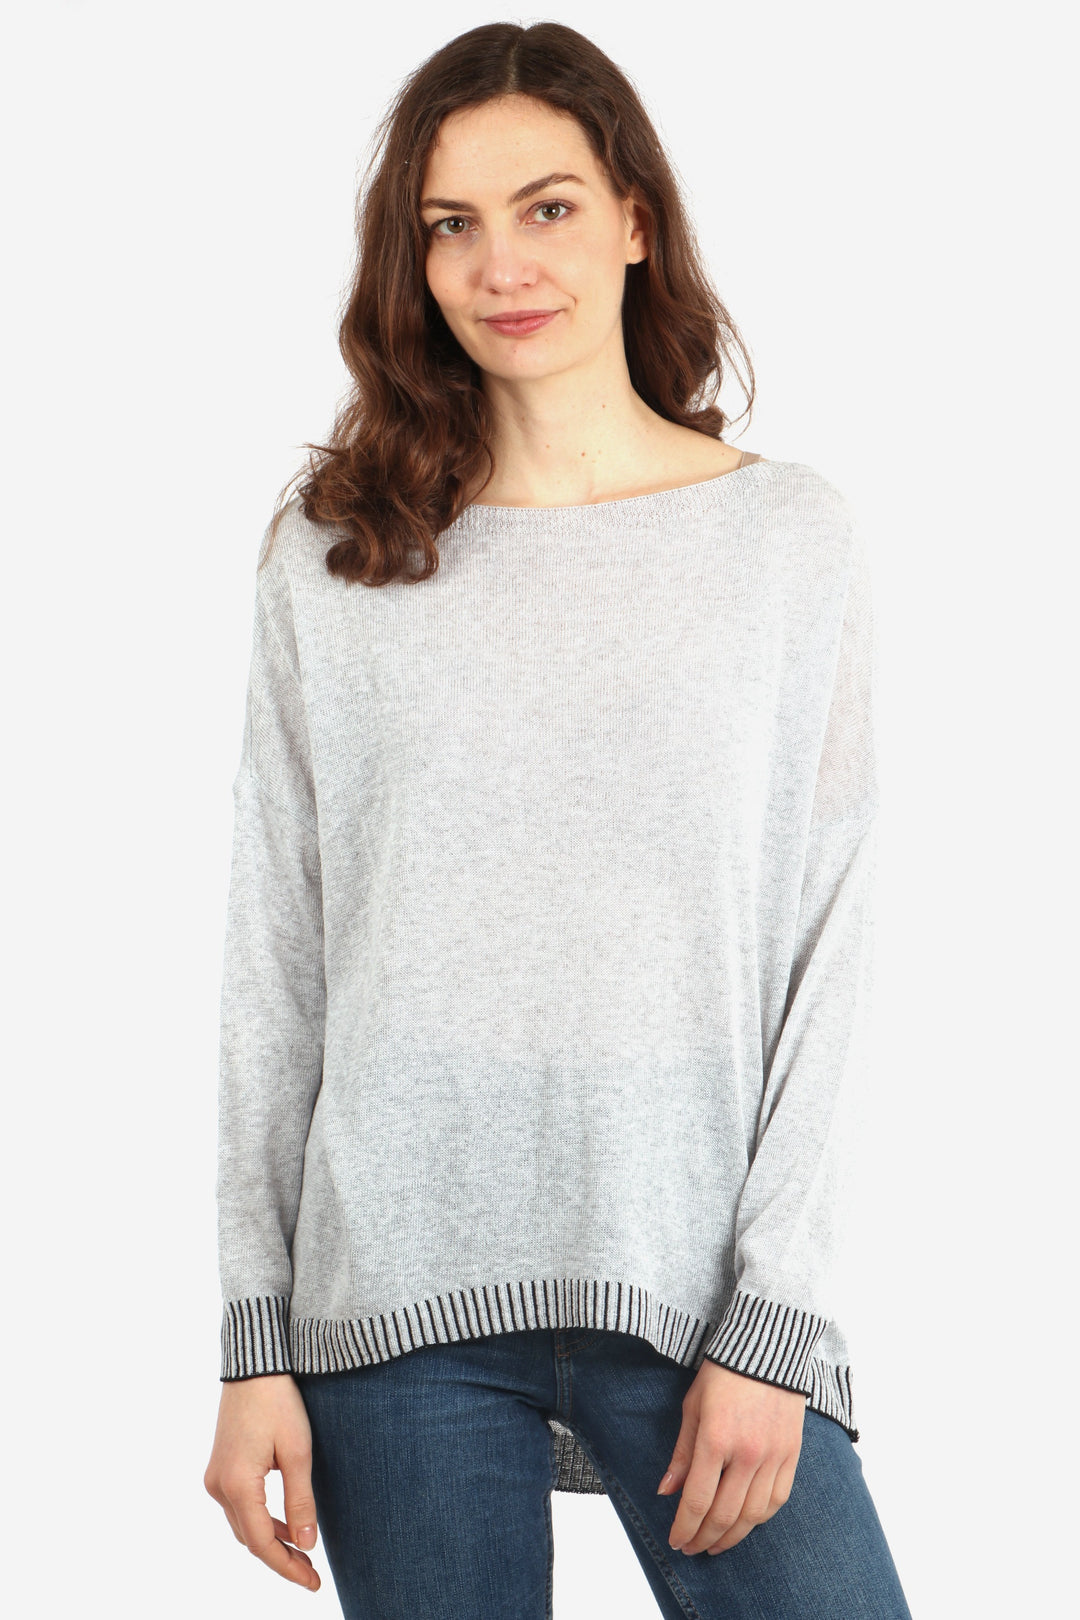 model wearing a long sleeve boat neck cotton jumper in light grey with a contrasting black stitched hem and cuff